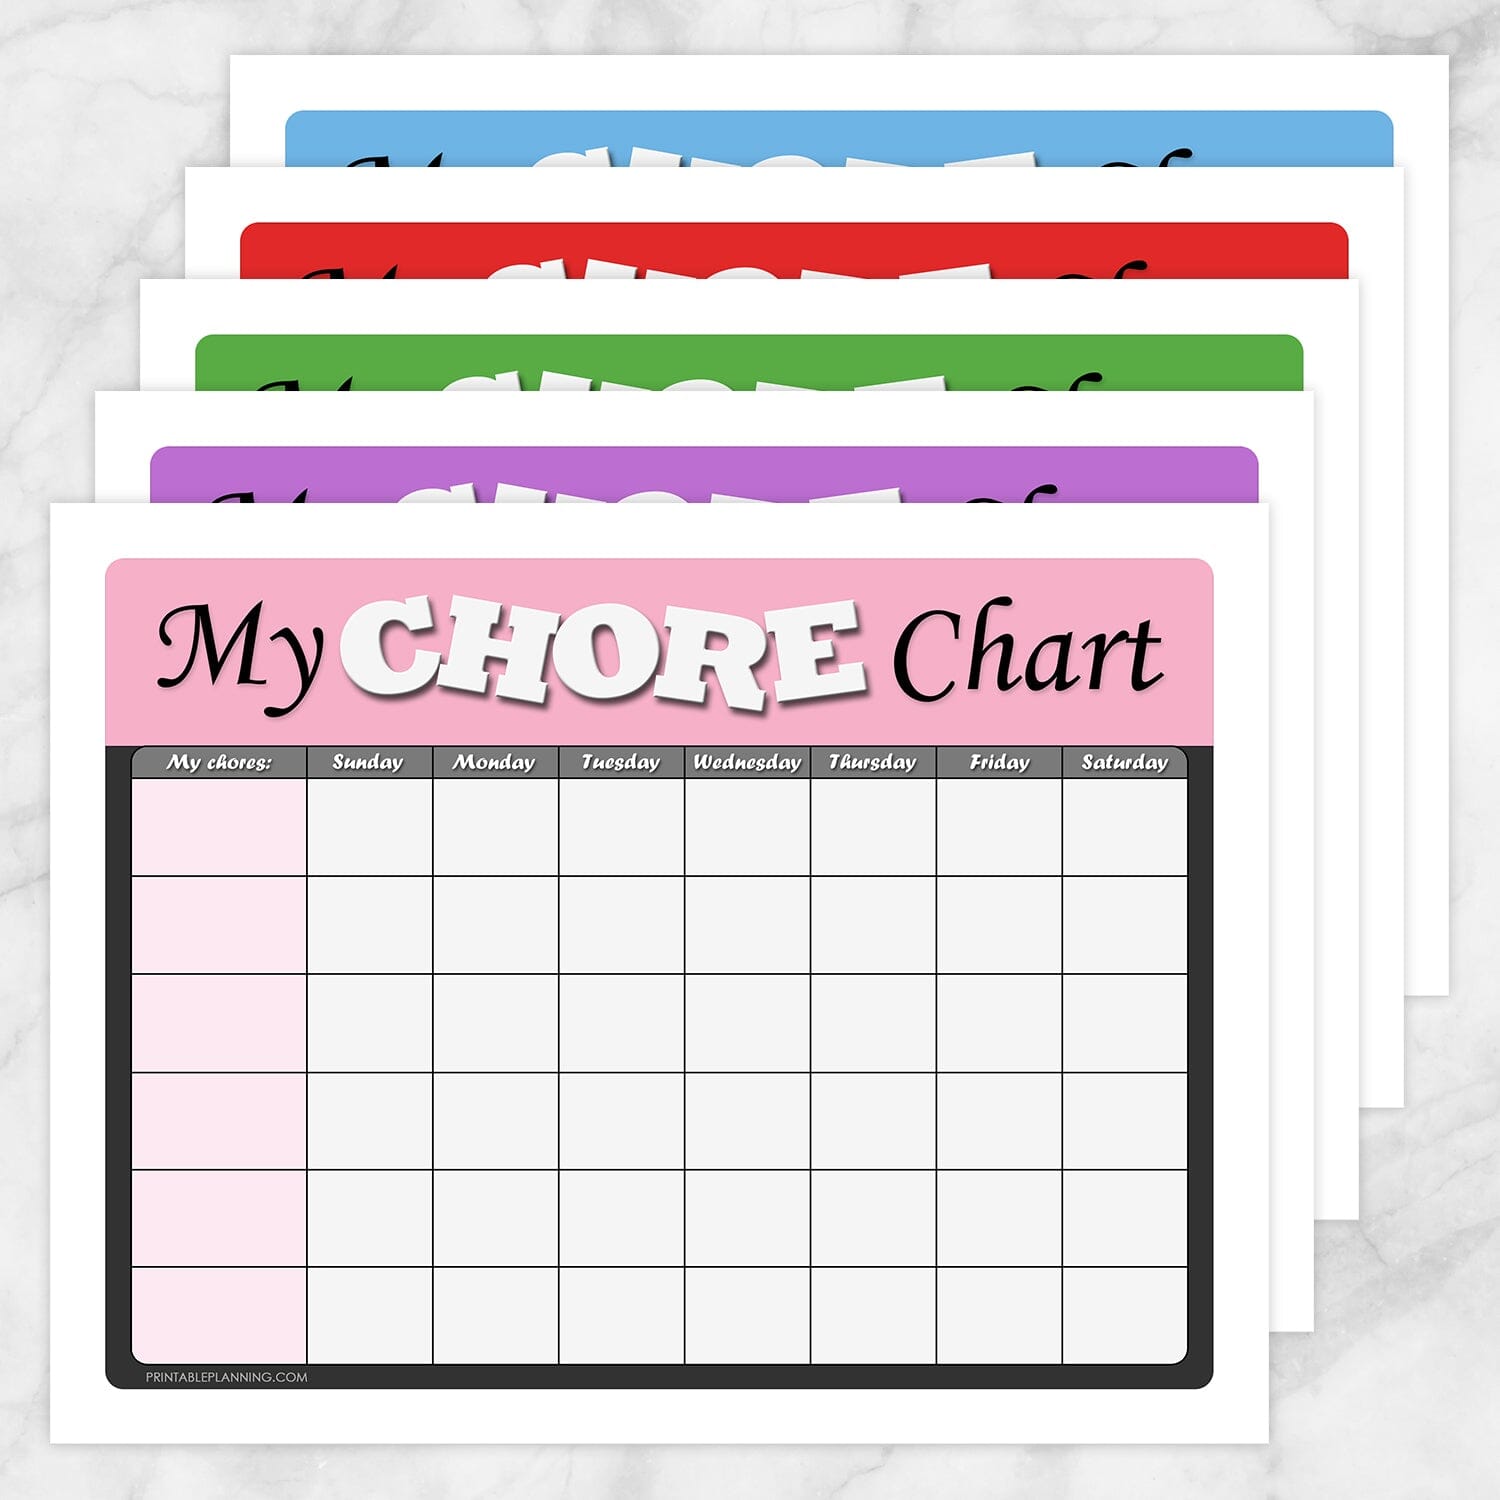 Free Printable Chore Charts for Kids and Adults